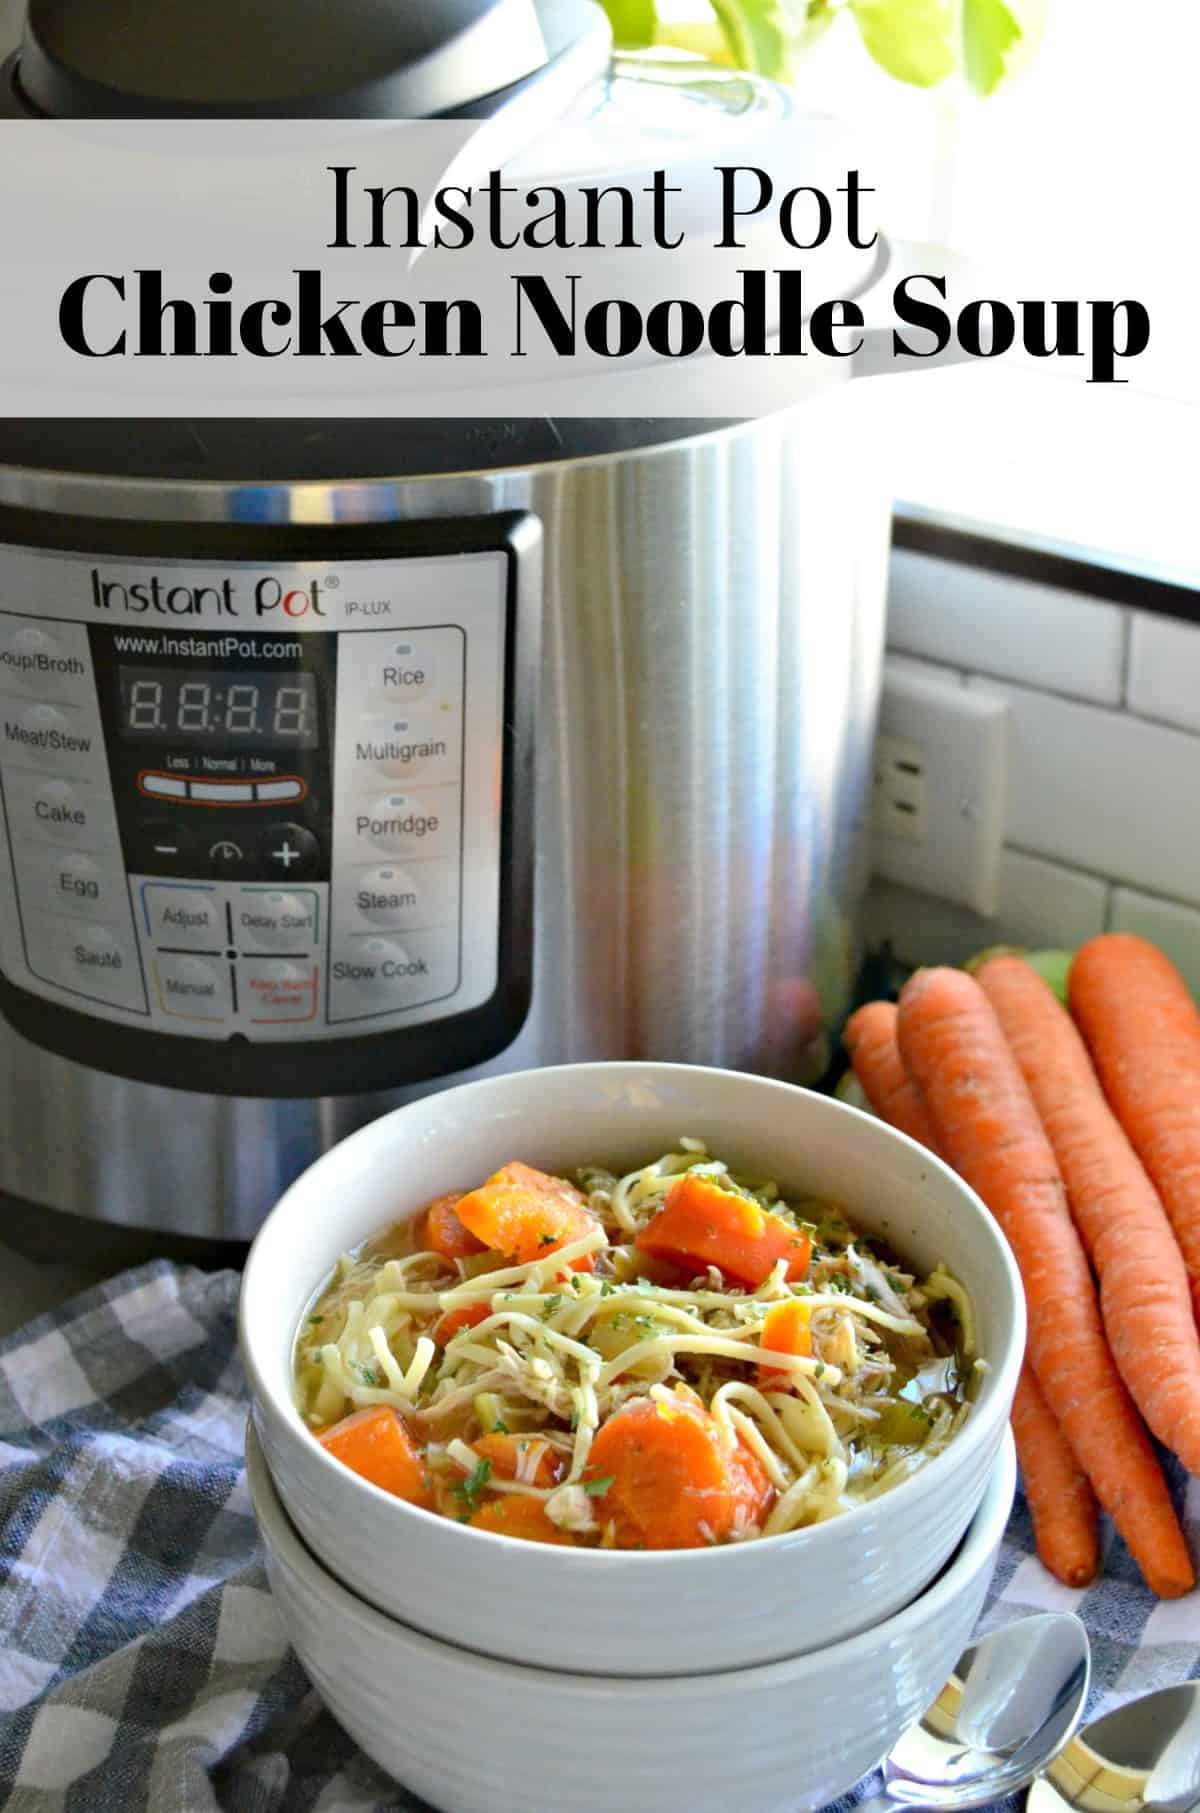 bowl of chicken noodle soup with carrots and celery in it in front of instant pot and fresh carrots.